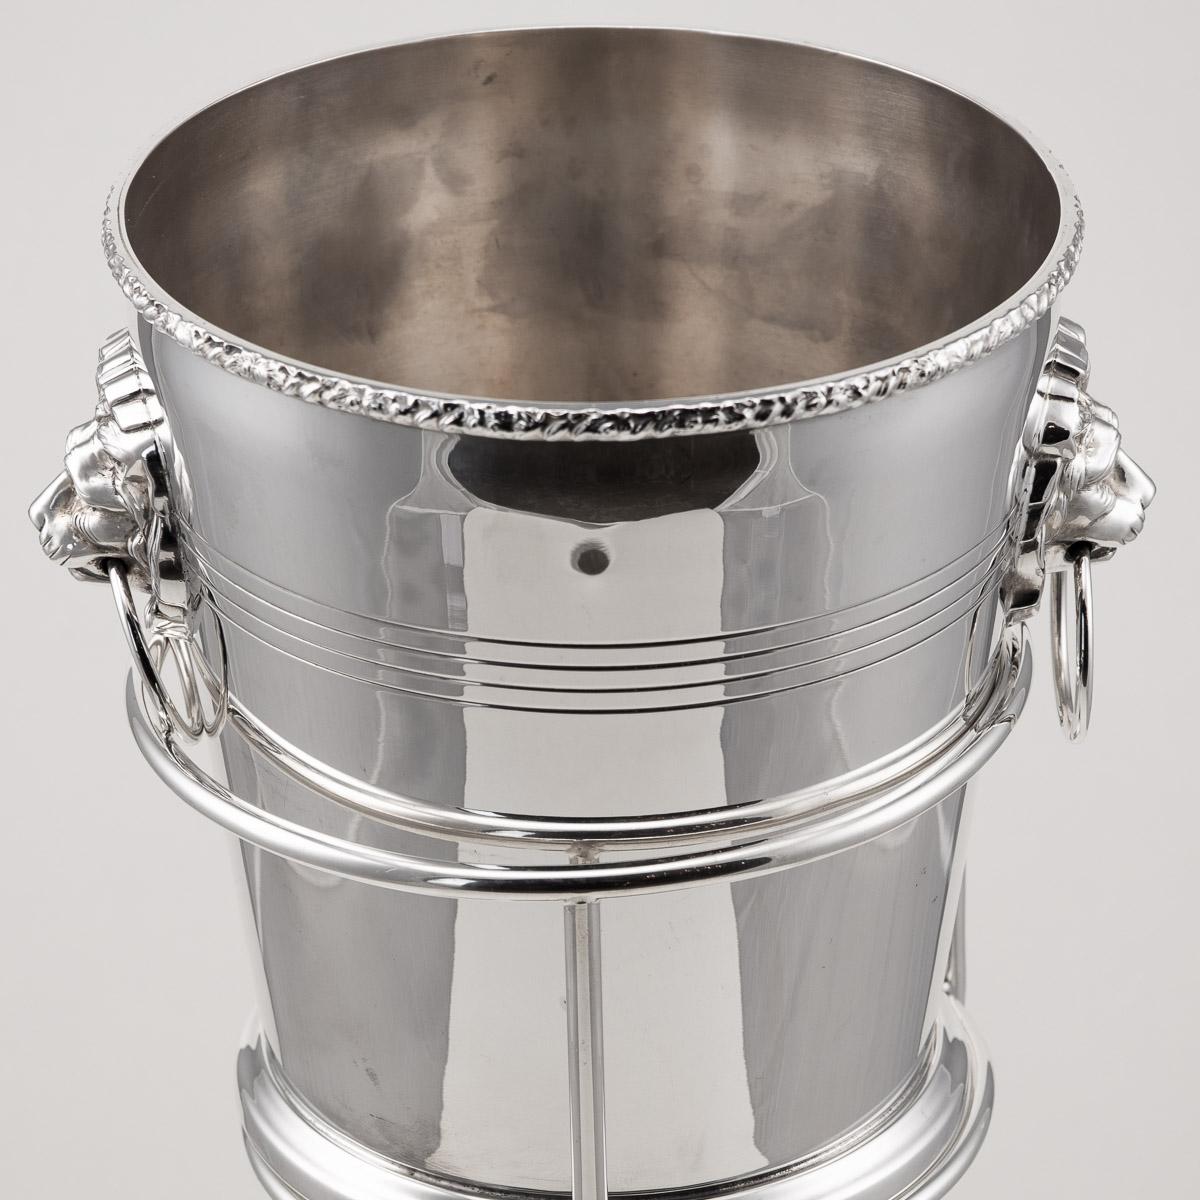 British 20th Century Silver Plated Wine Cooler & Stand, Mappin & Webb, c.1930